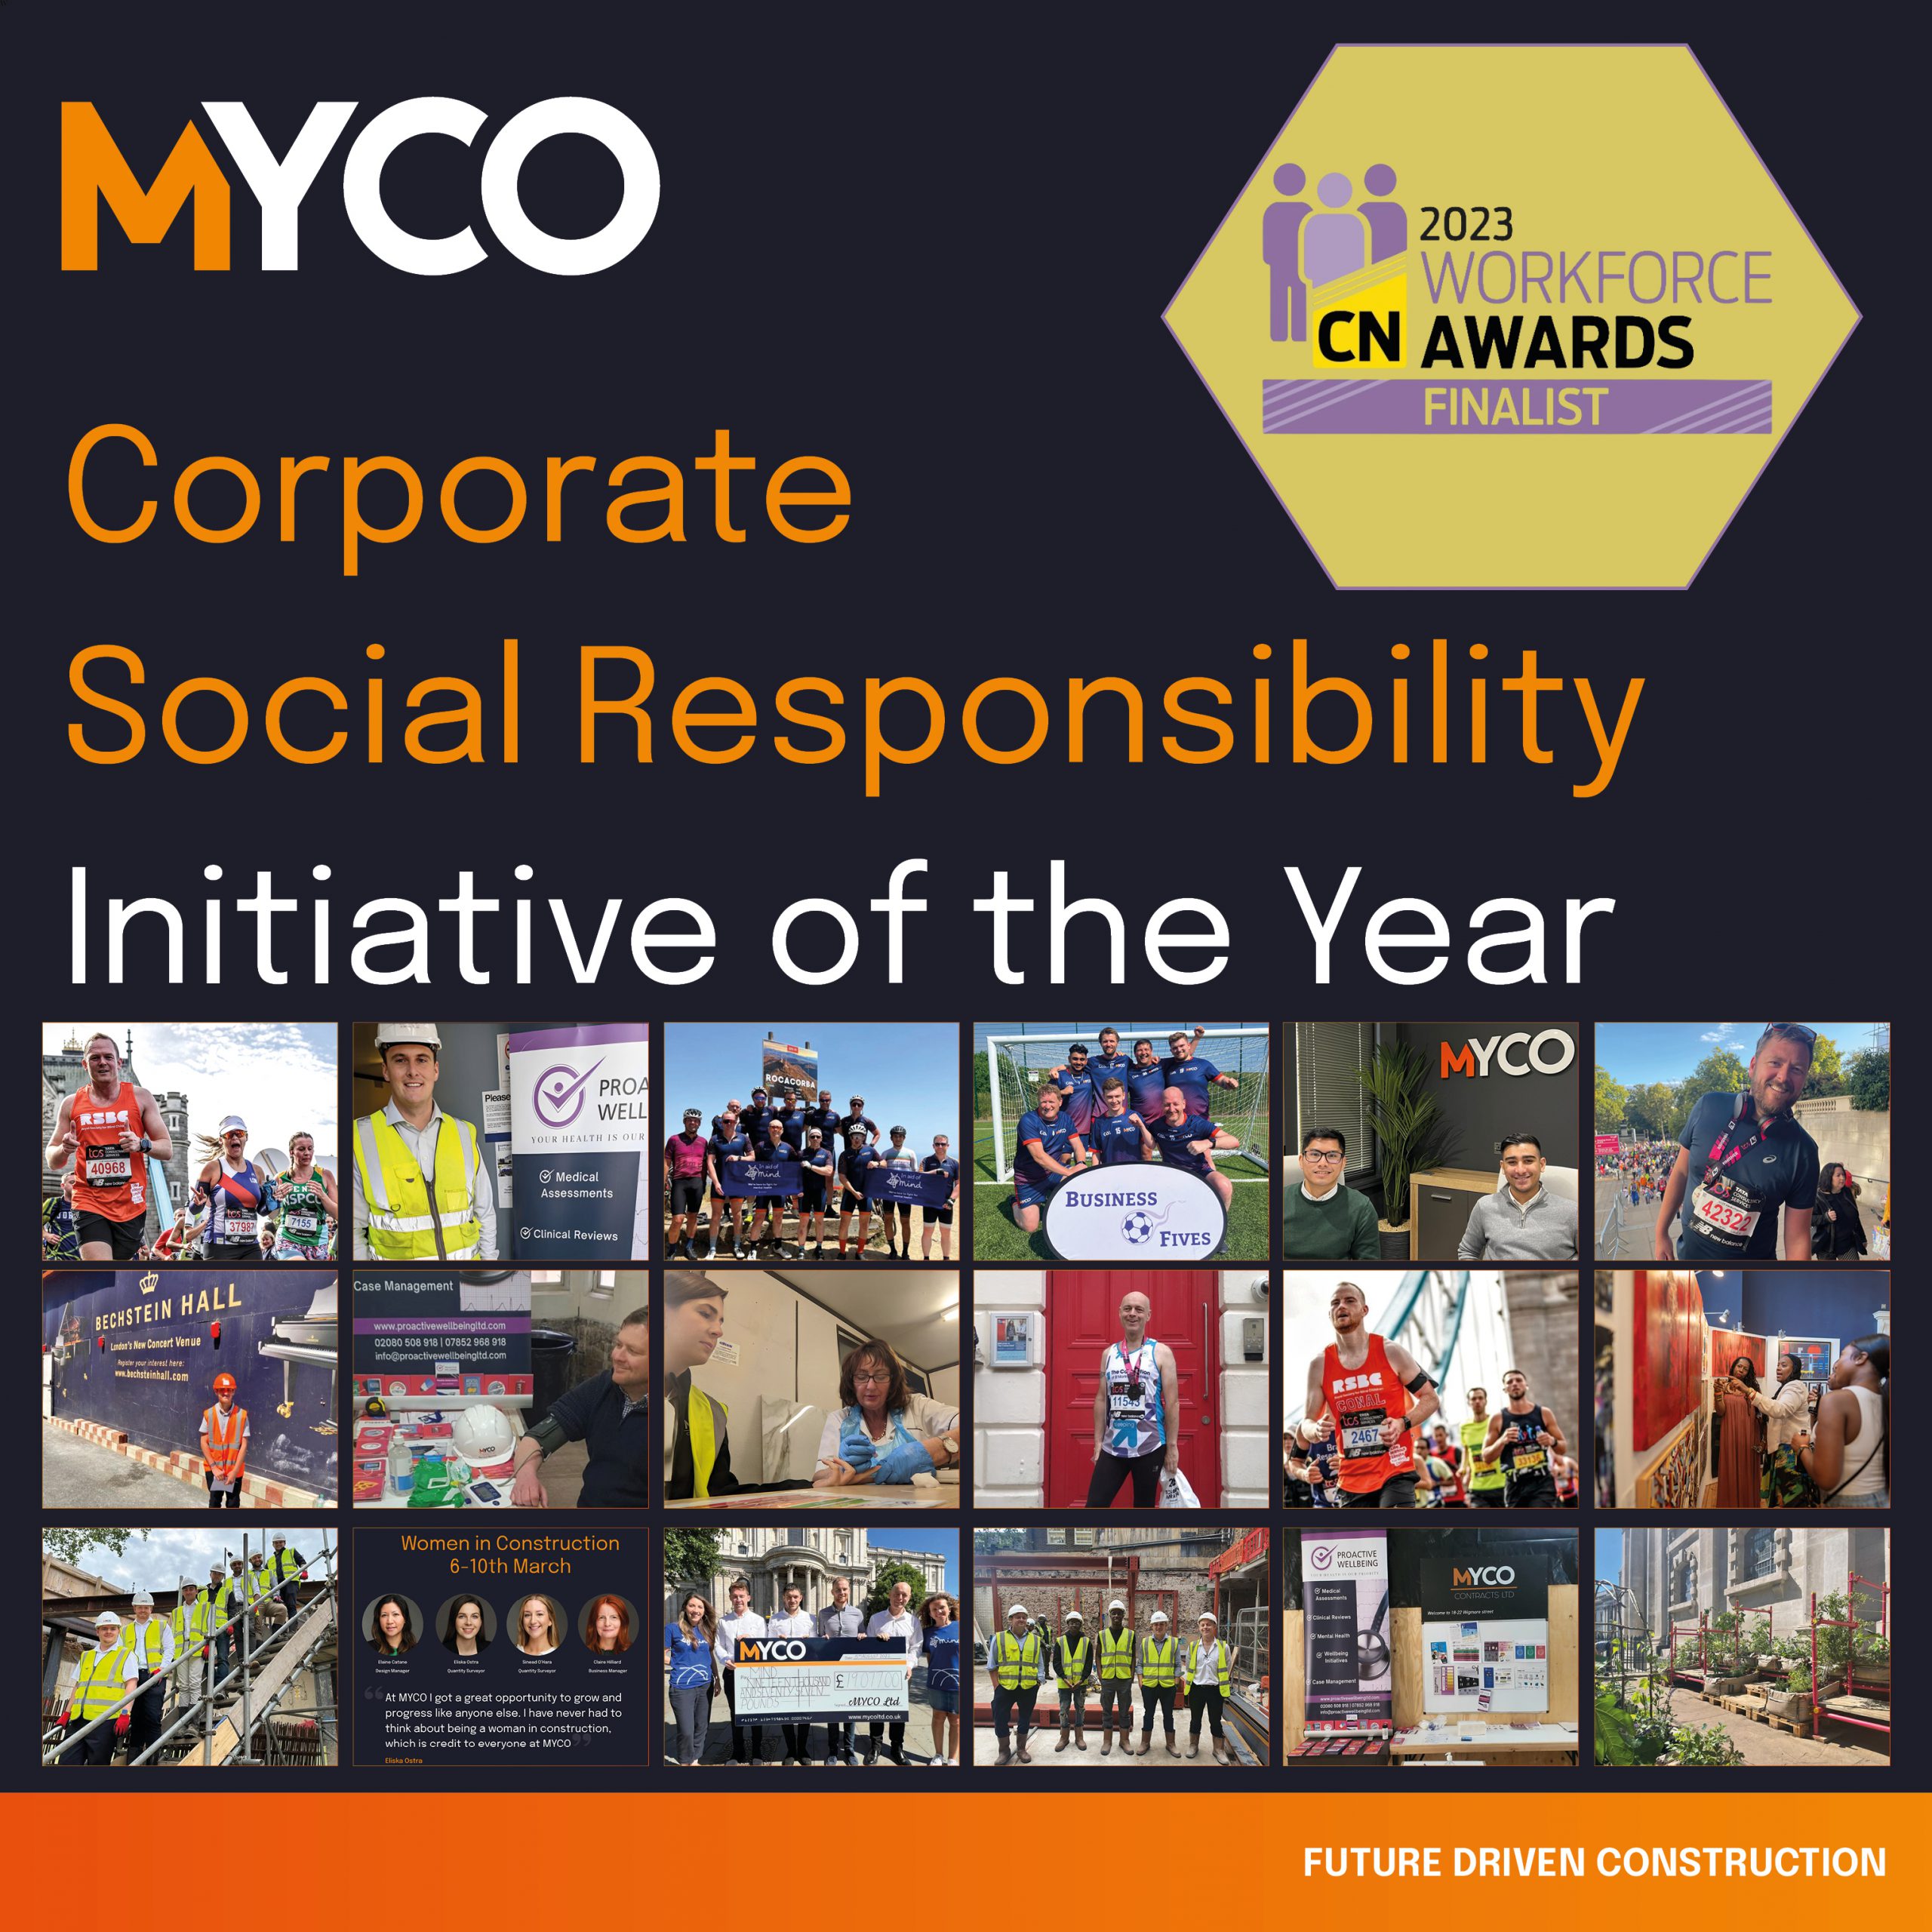 MYCO Shortlisted for the Corporate Social Responsibility Initiative of the Year at the Construction News Work Force Awards